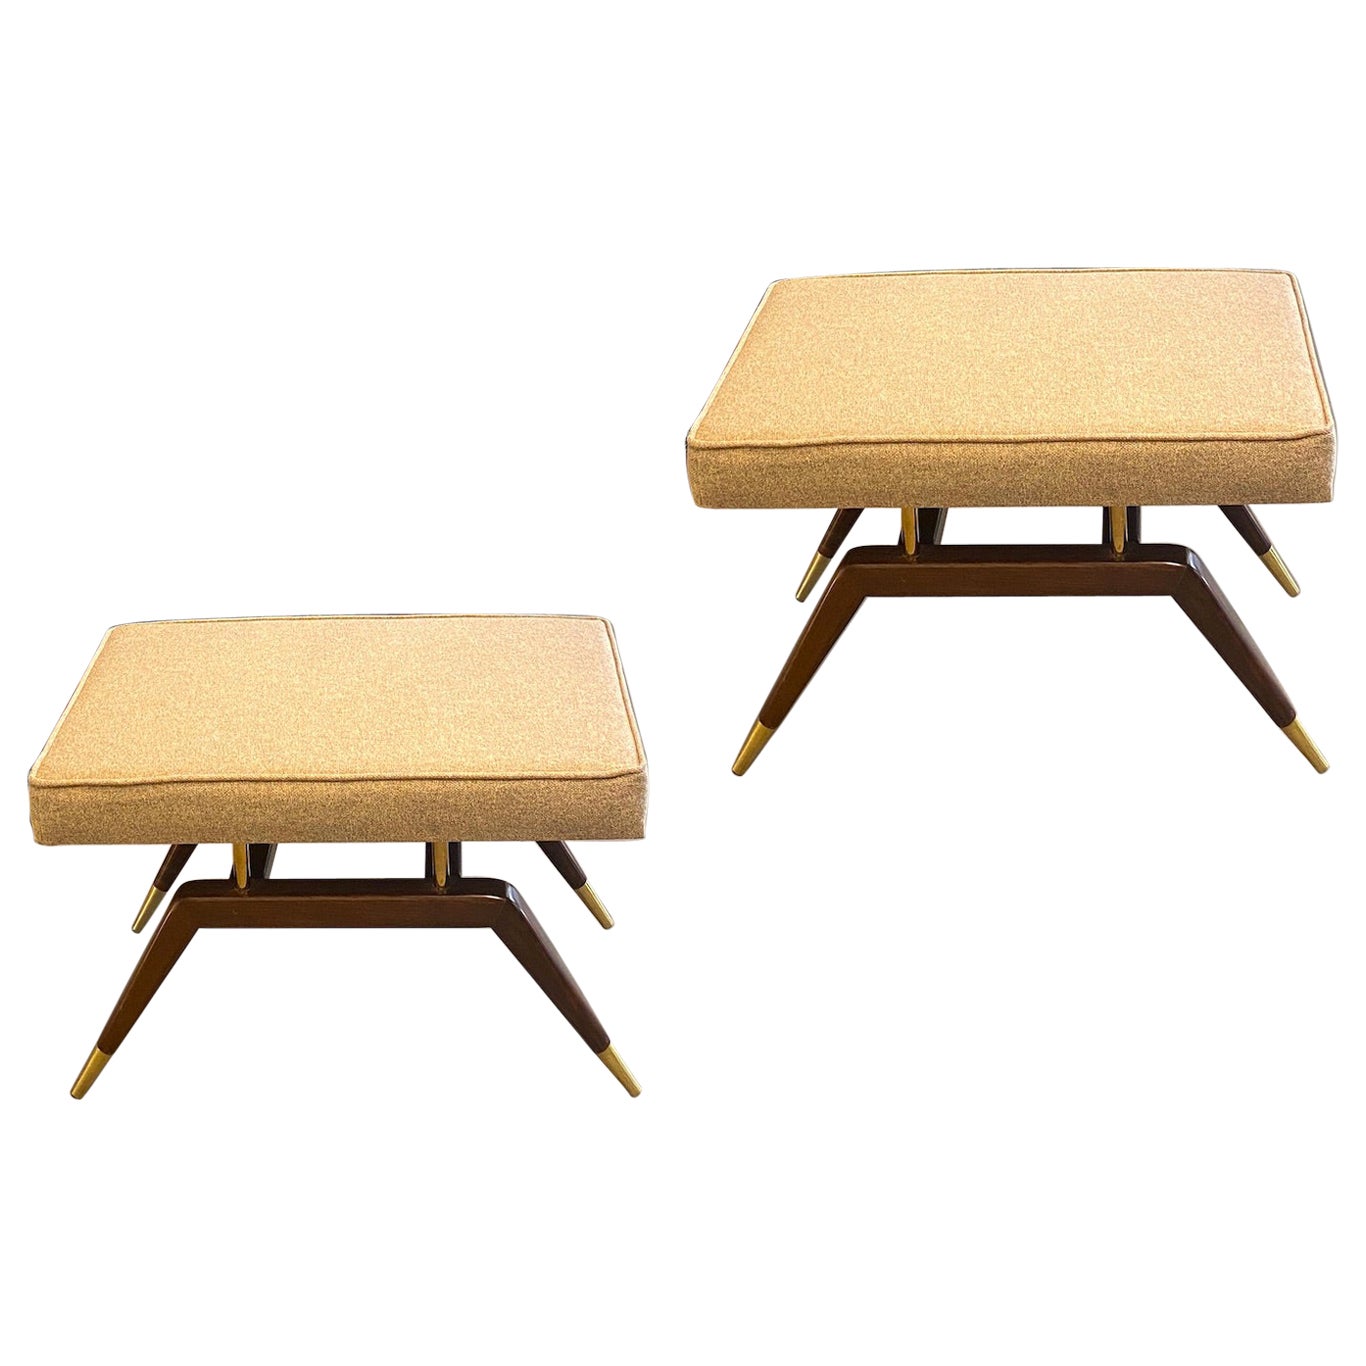 Pair of Modern Gio Ponti Style Window Benches or Settees  For Sale